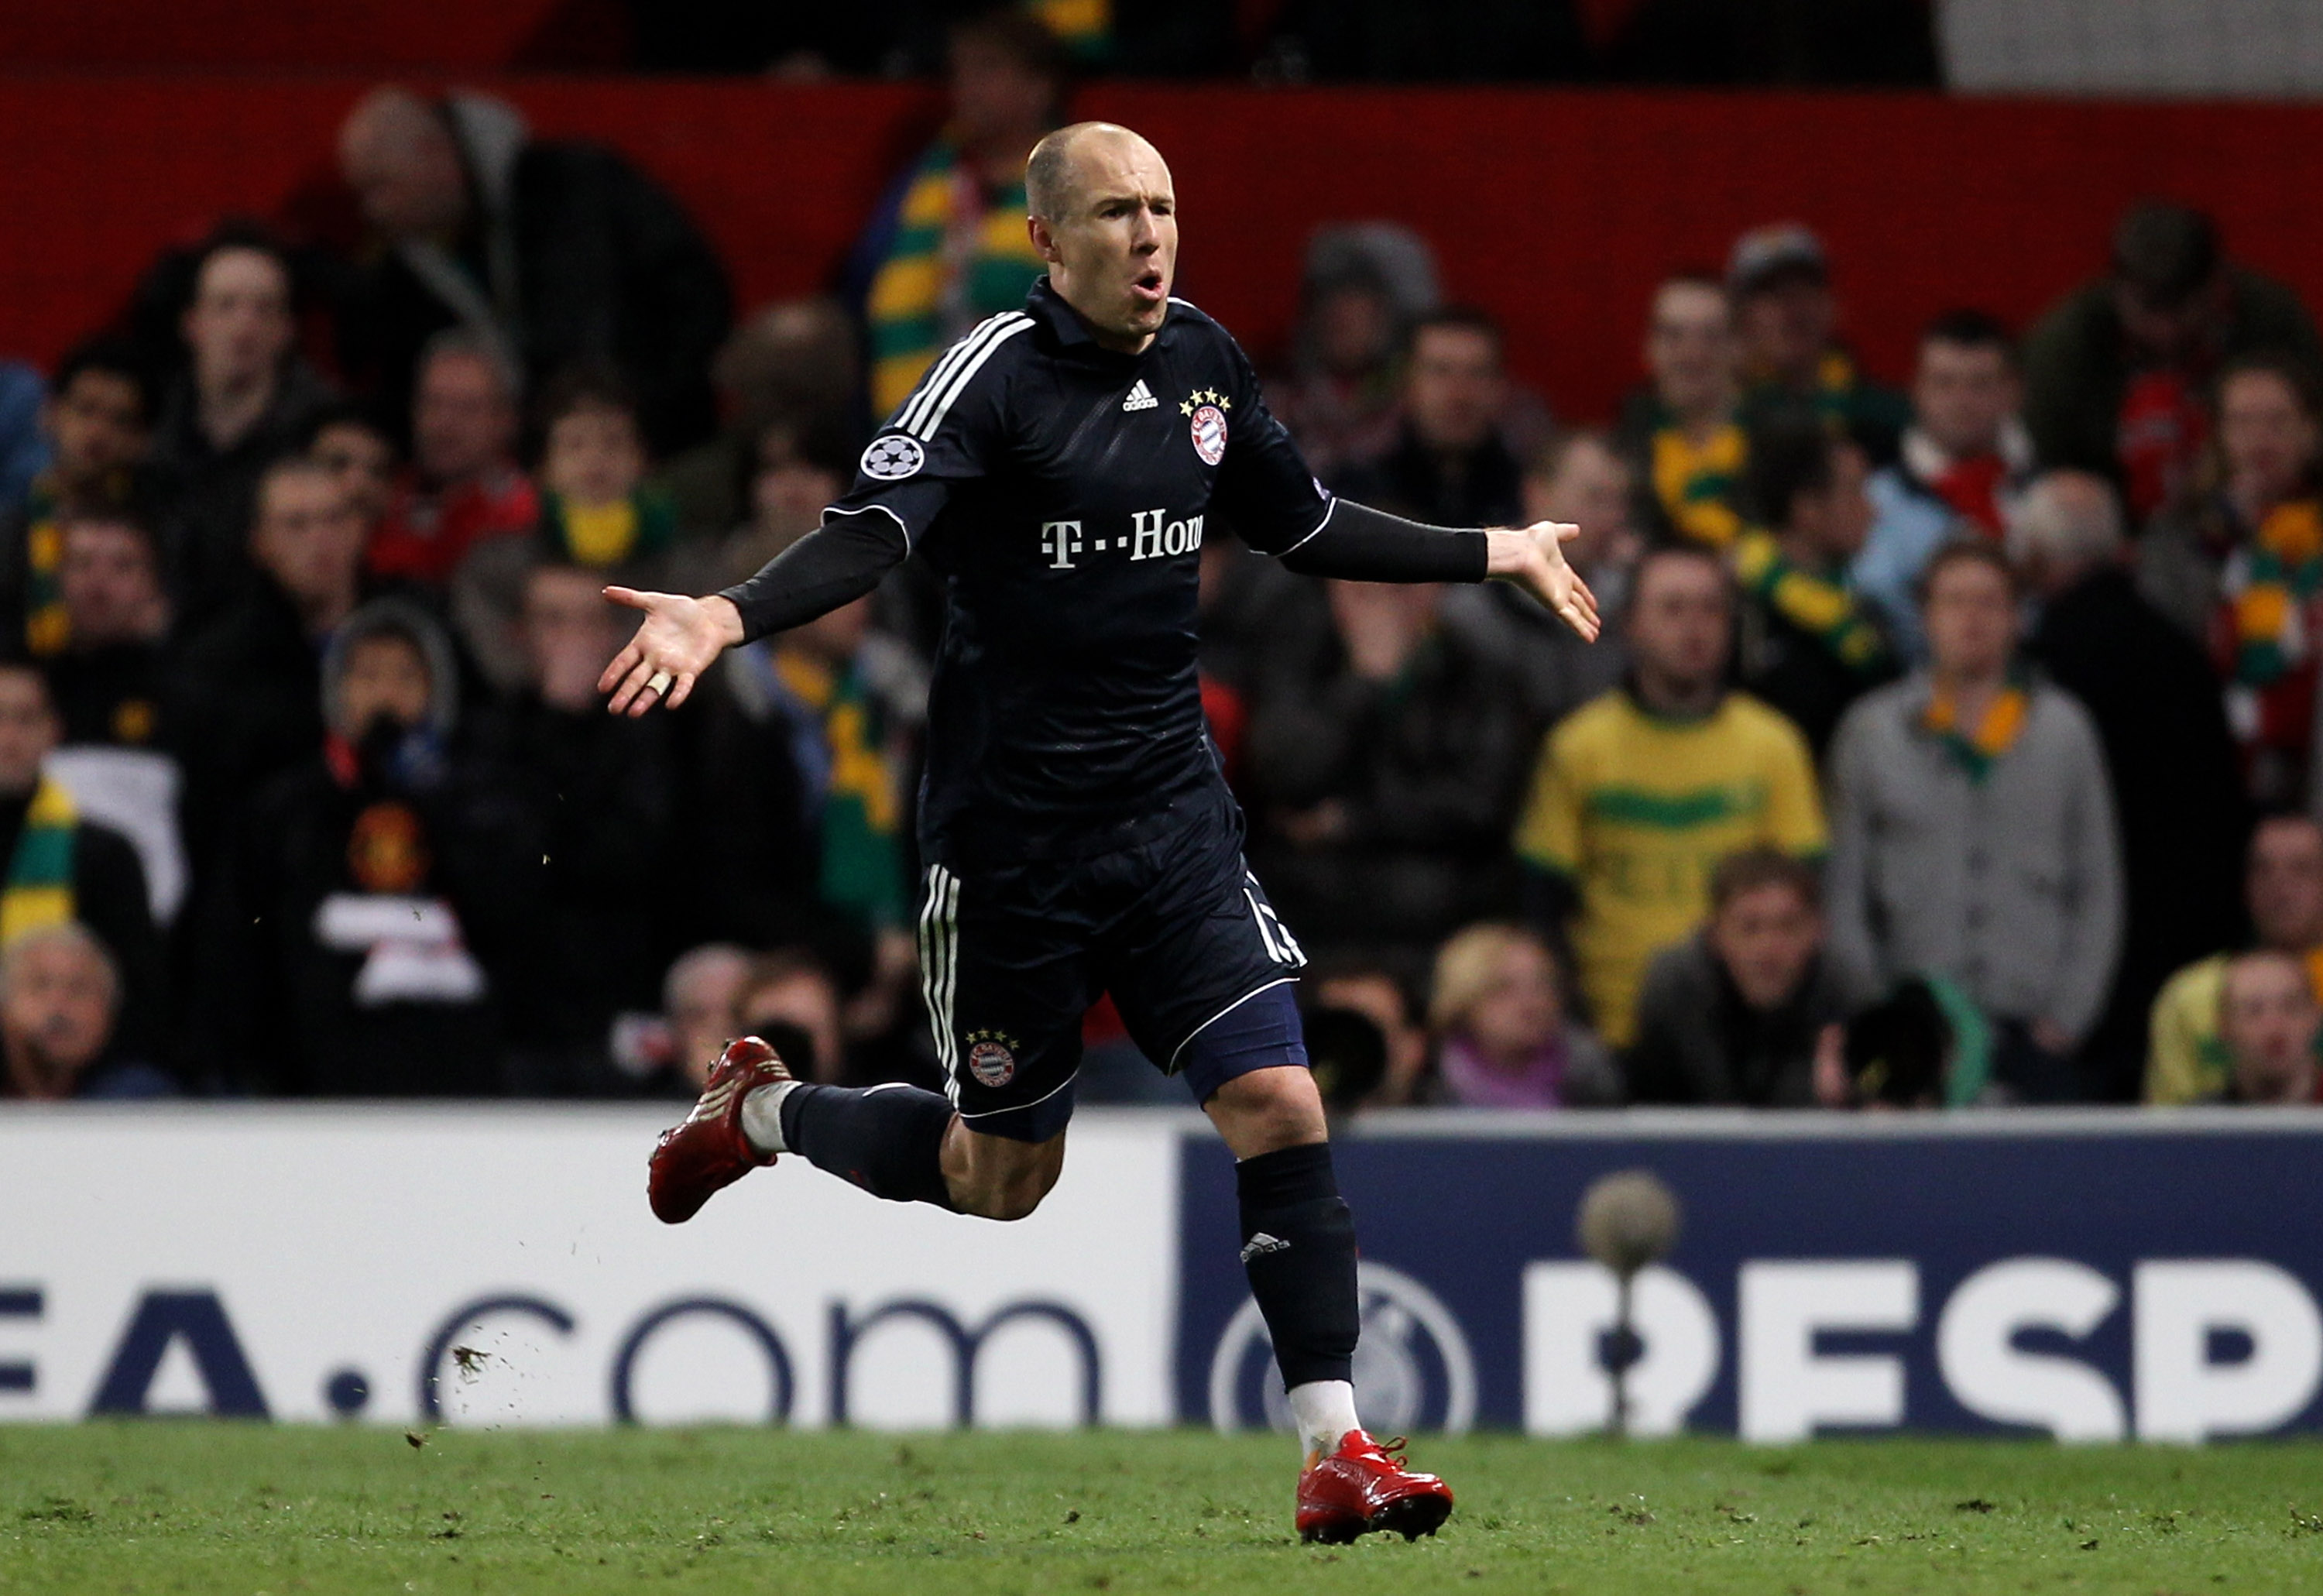 MANCHESTER, ENGLAND - APRIL 07:  Arjen Robben of Bayern Muenchen celebrates scoring his team's second goal during the UEFA Champions League Quarter Final second leg match between Manchester United and Bayern Muenchen at Old Trafford on April 7, 2010 in Ma